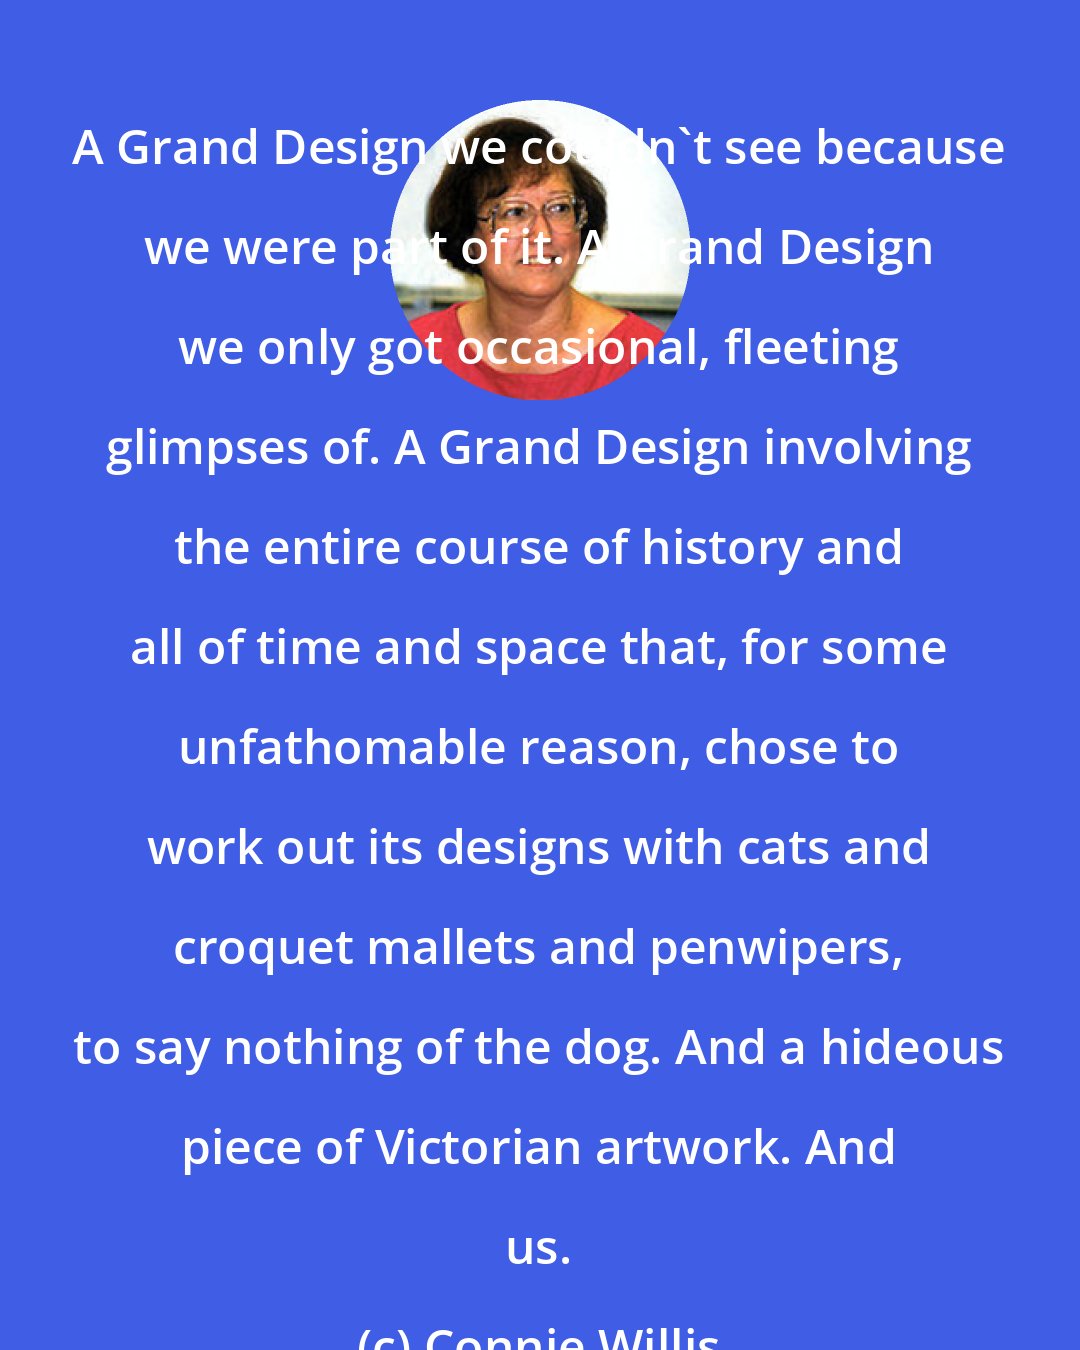 Connie Willis: A Grand Design we couldn't see because we were part of it. A Grand Design we only got occasional, fleeting glimpses of. A Grand Design involving the entire course of history and all of time and space that, for some unfathomable reason, chose to work out its designs with cats and croquet mallets and penwipers, to say nothing of the dog. And a hideous piece of Victorian artwork. And us.